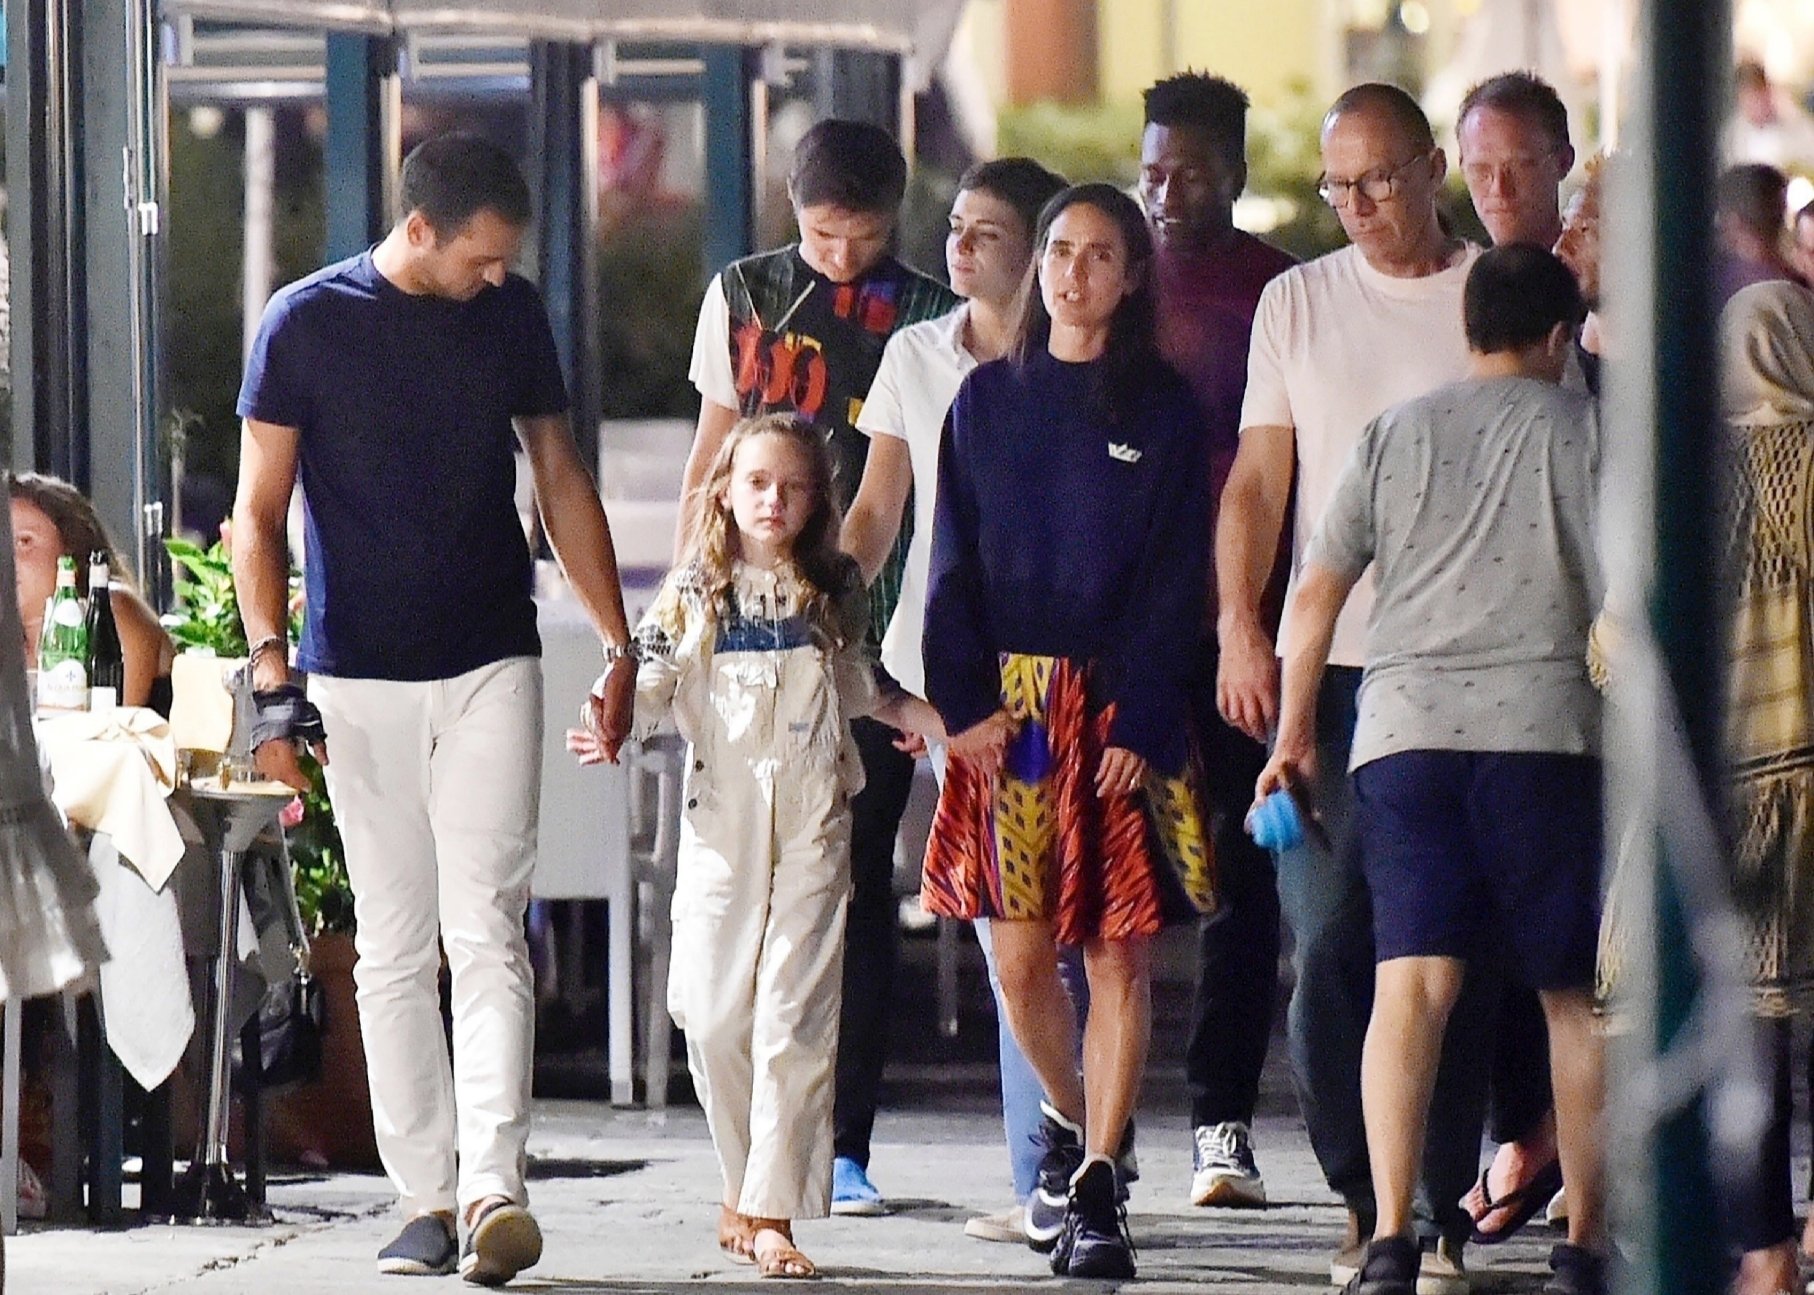 Jennifer Connelly & Paul Bettany: LAX Arrivial with the Kids